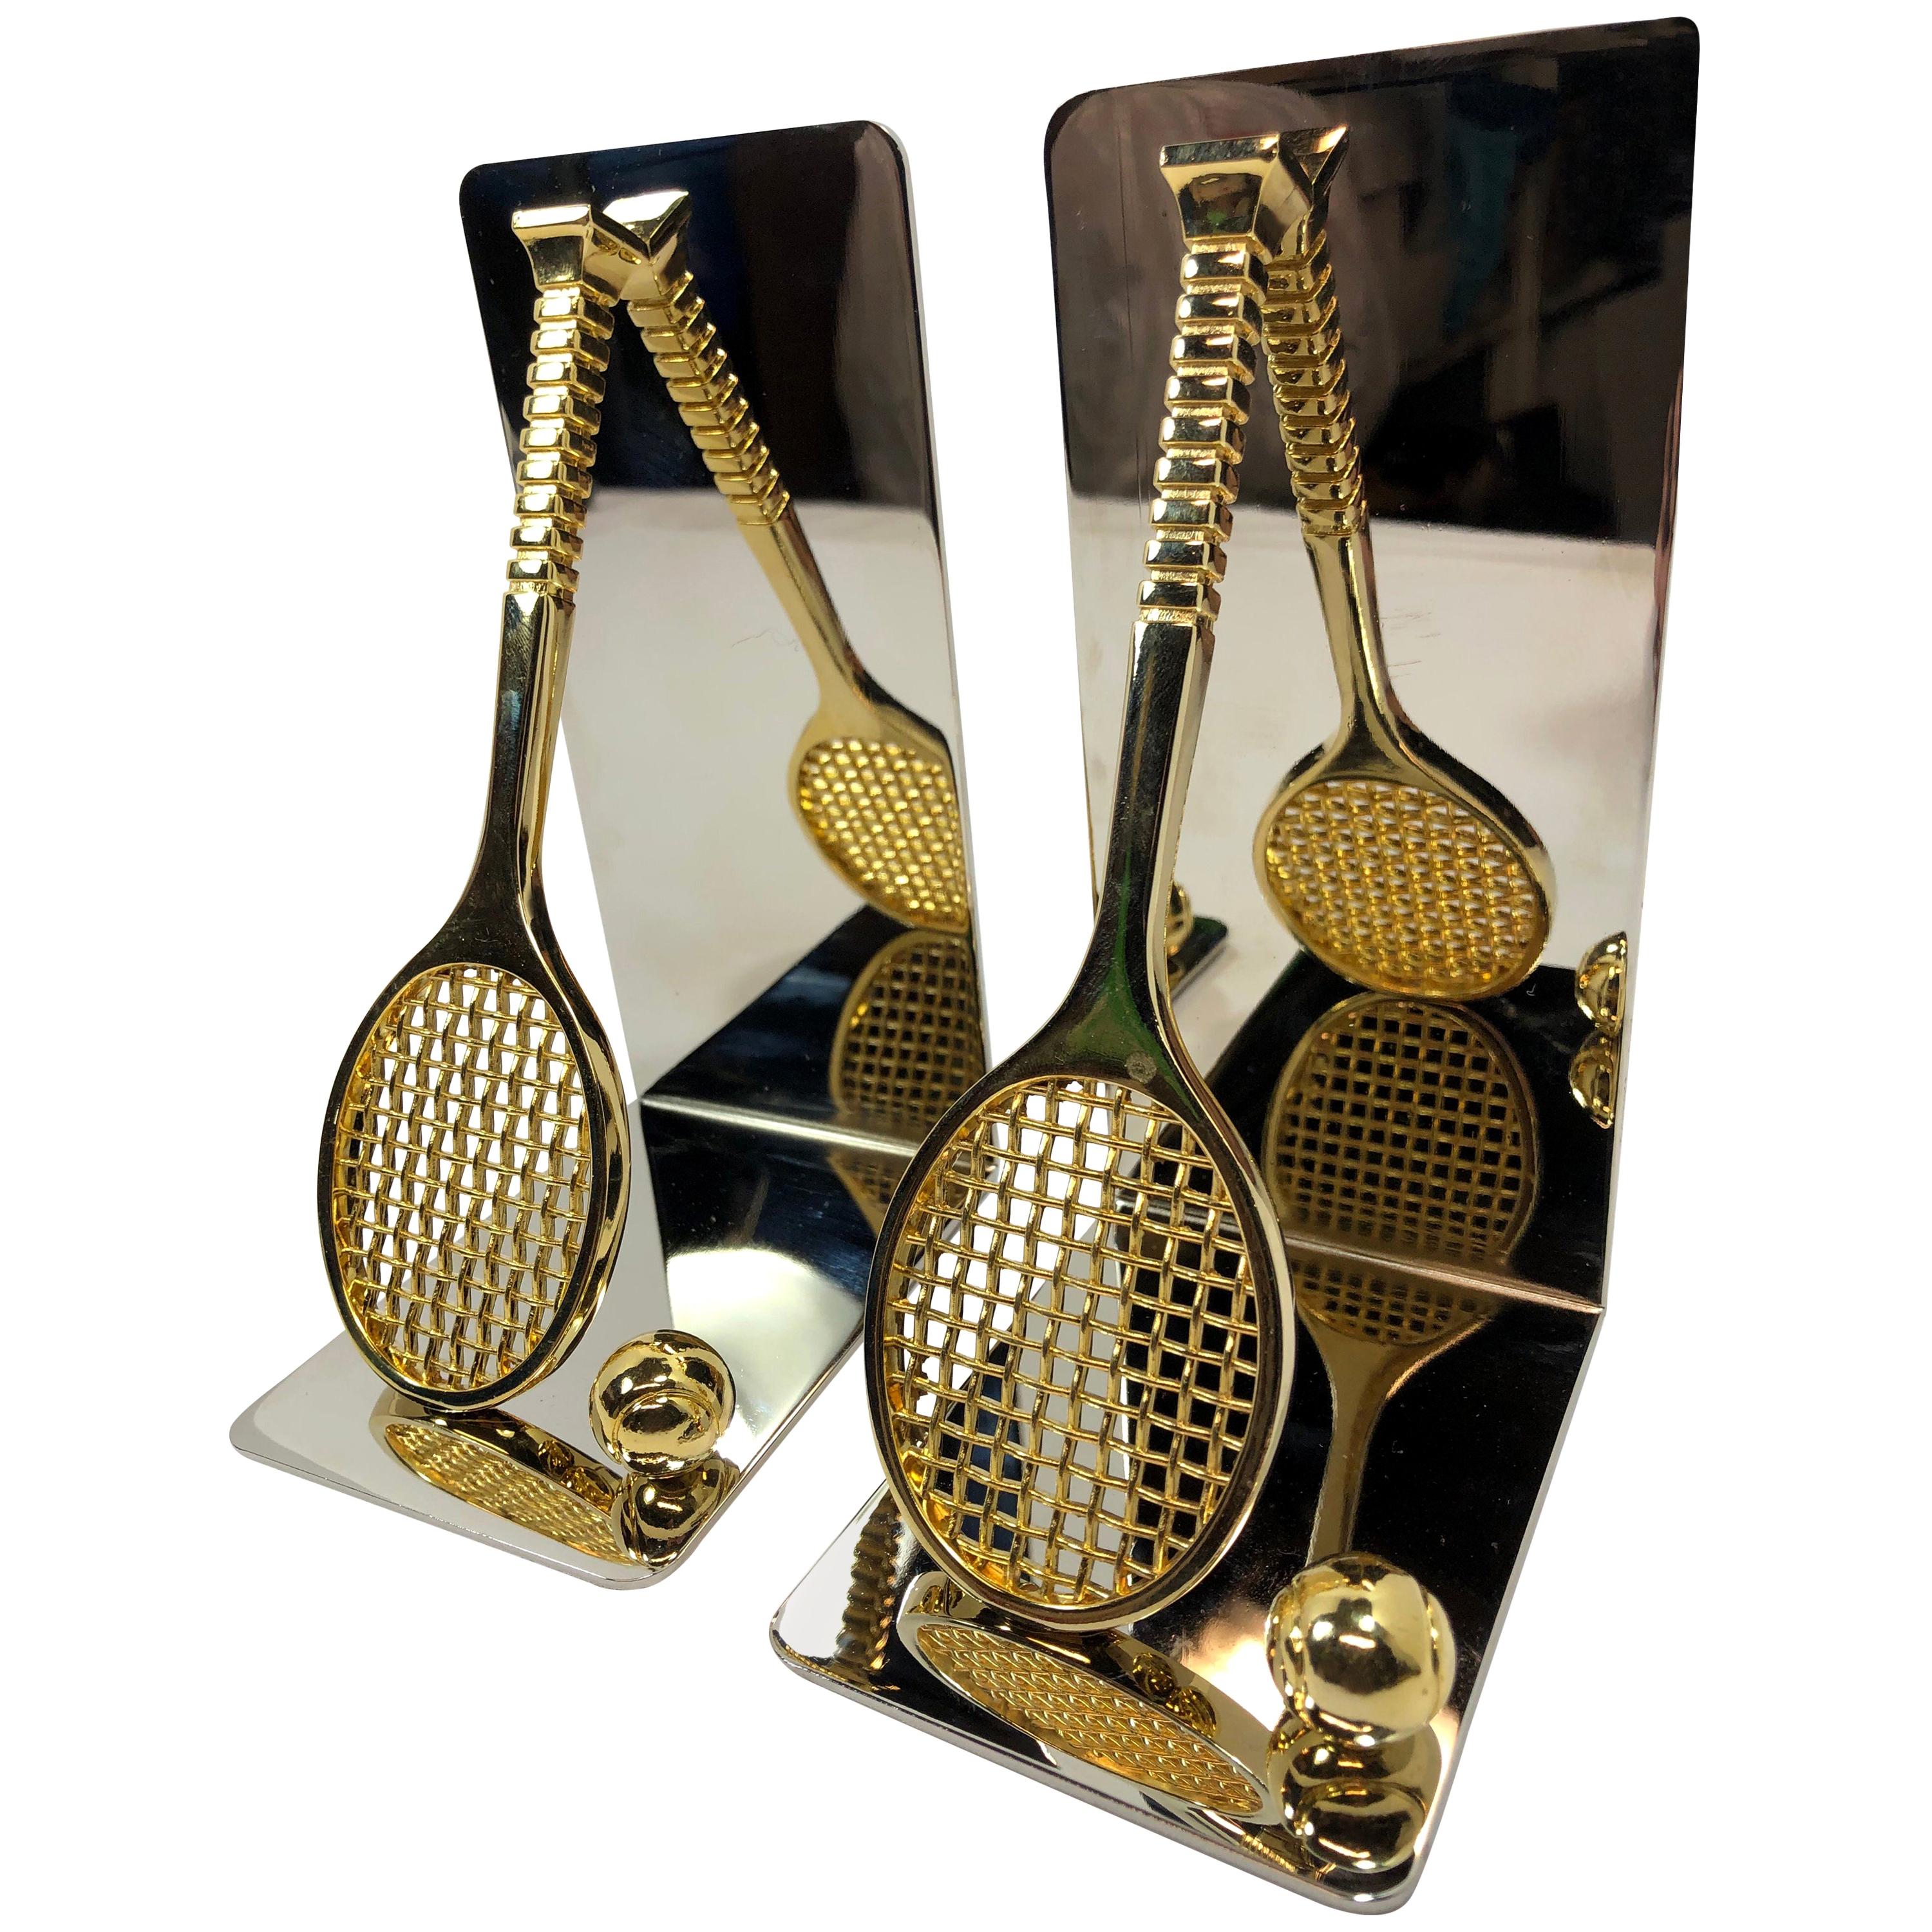 Set of Polished Brass and Chrome Tennis Racket Bookends